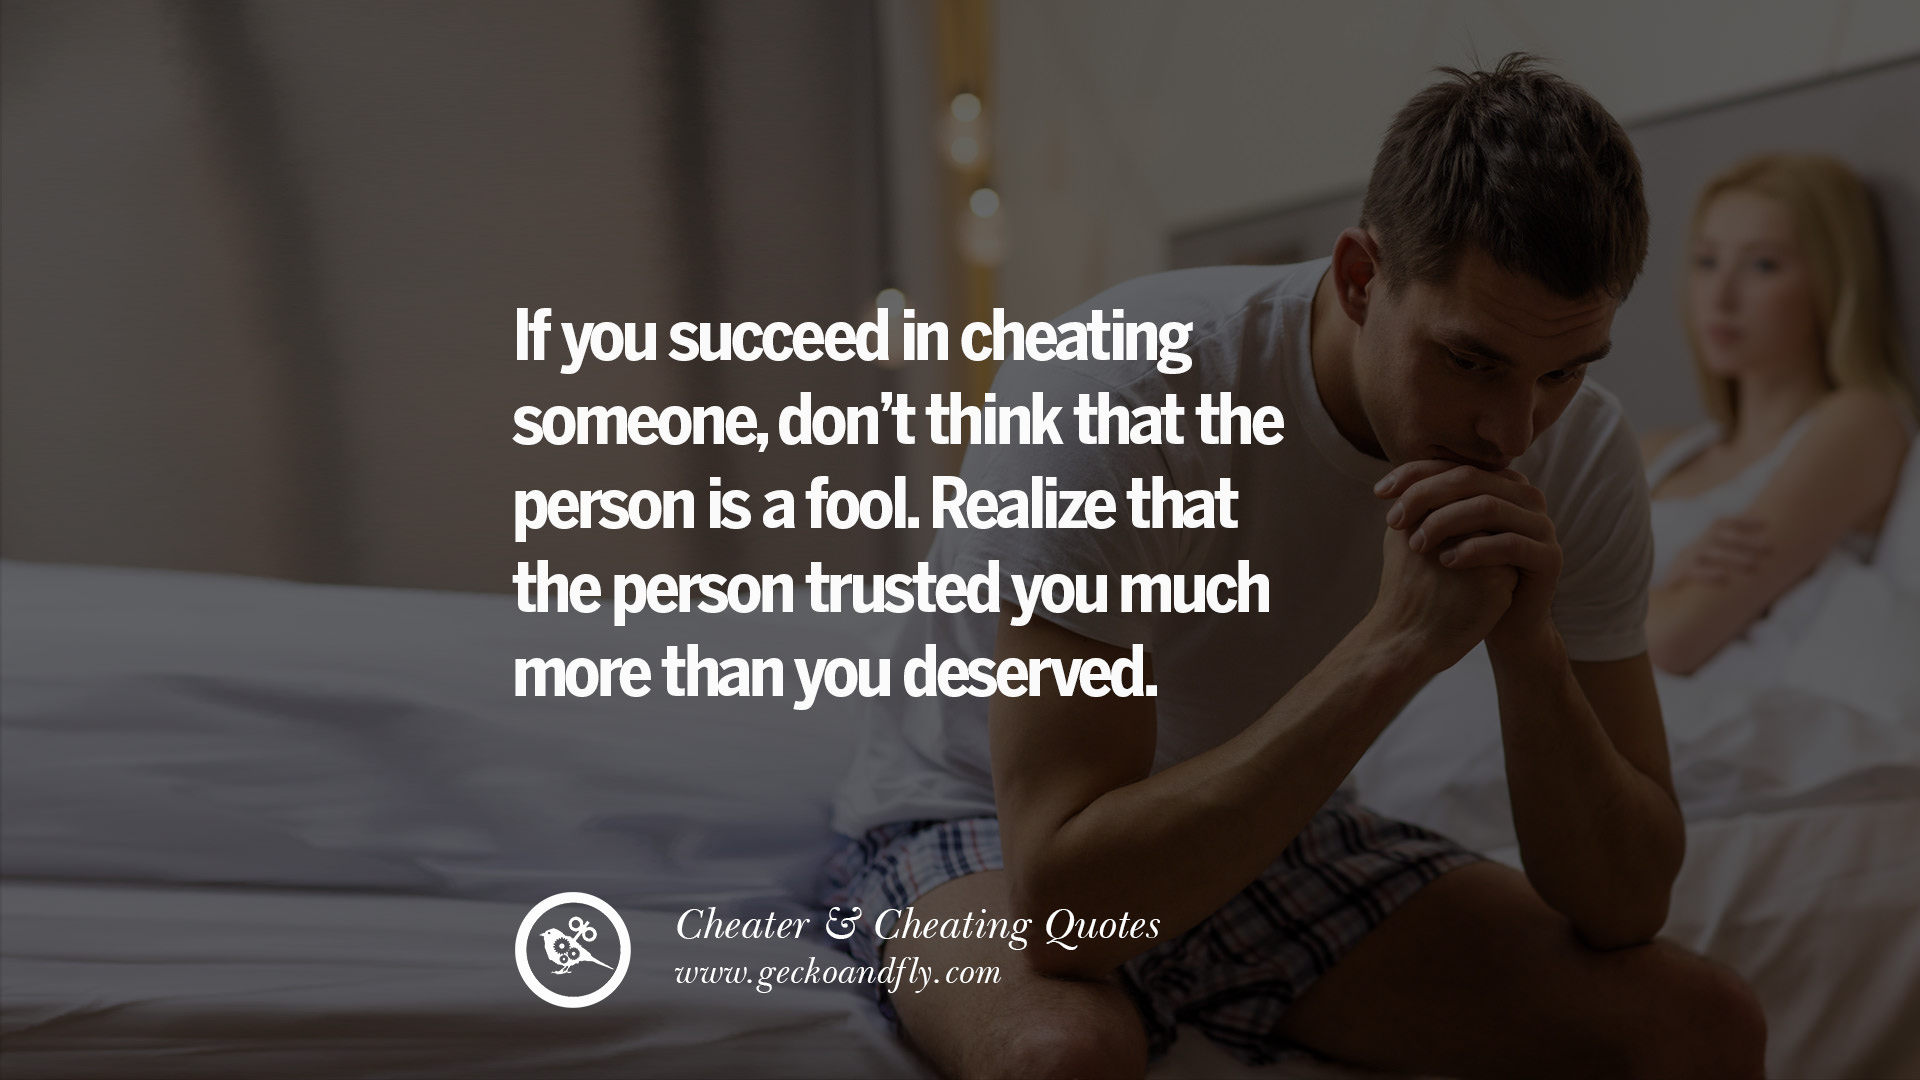 If you succeed in cheating someone, don’t think that the person is a fool. 